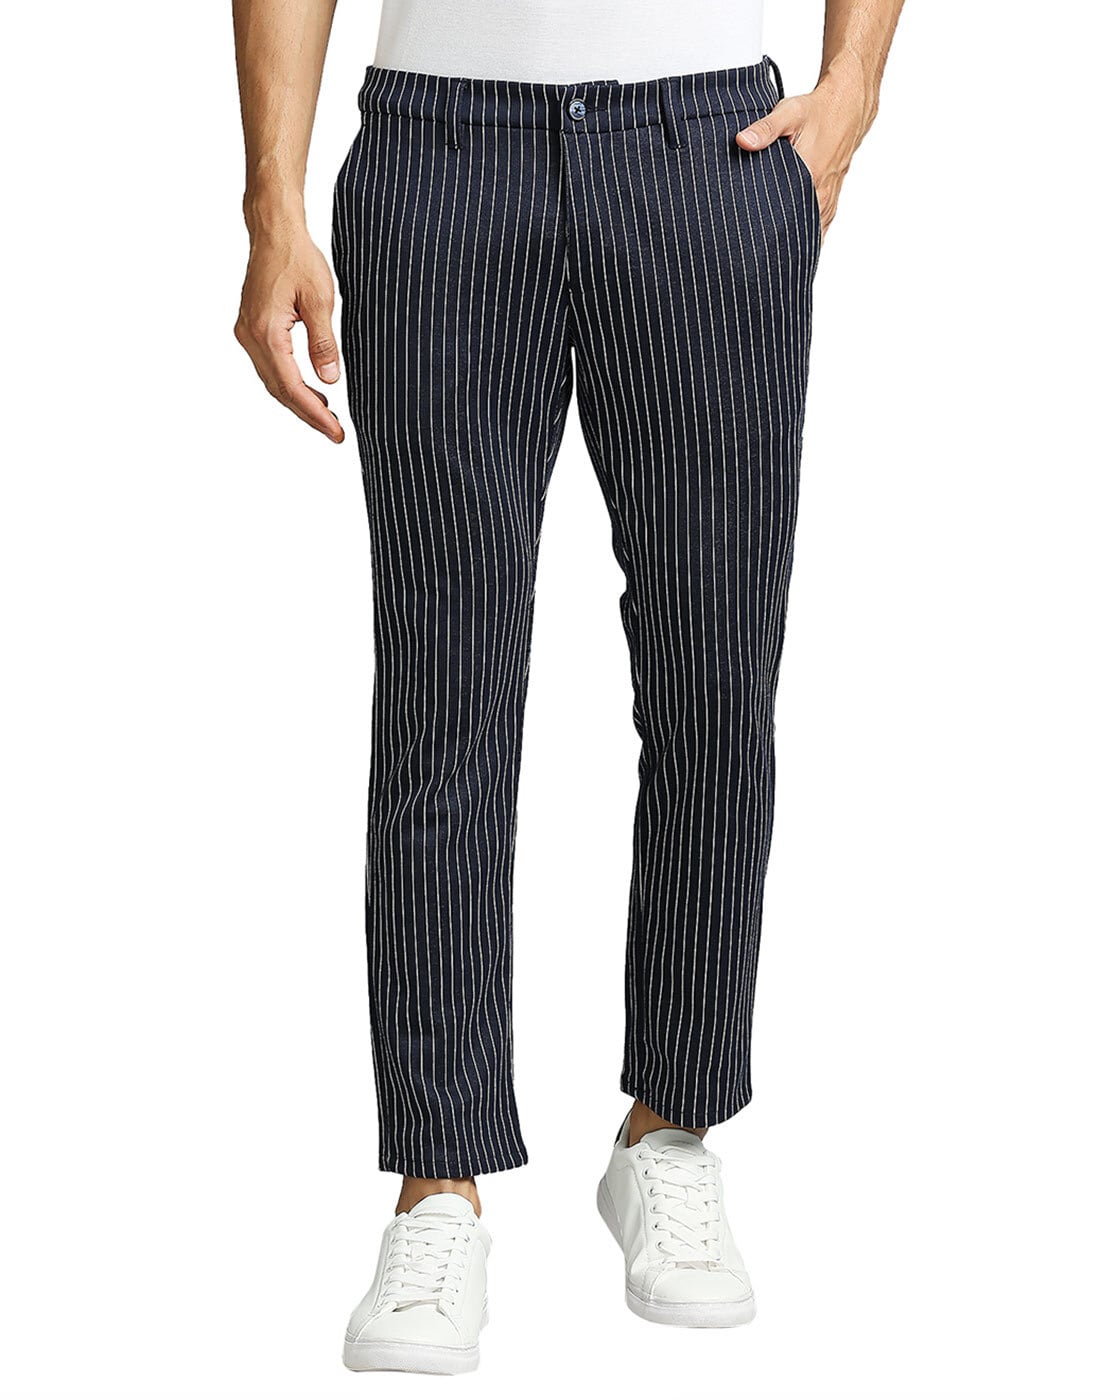 Elegant pants for men, Green with stripes, Slim Fit and Tapered - PN667